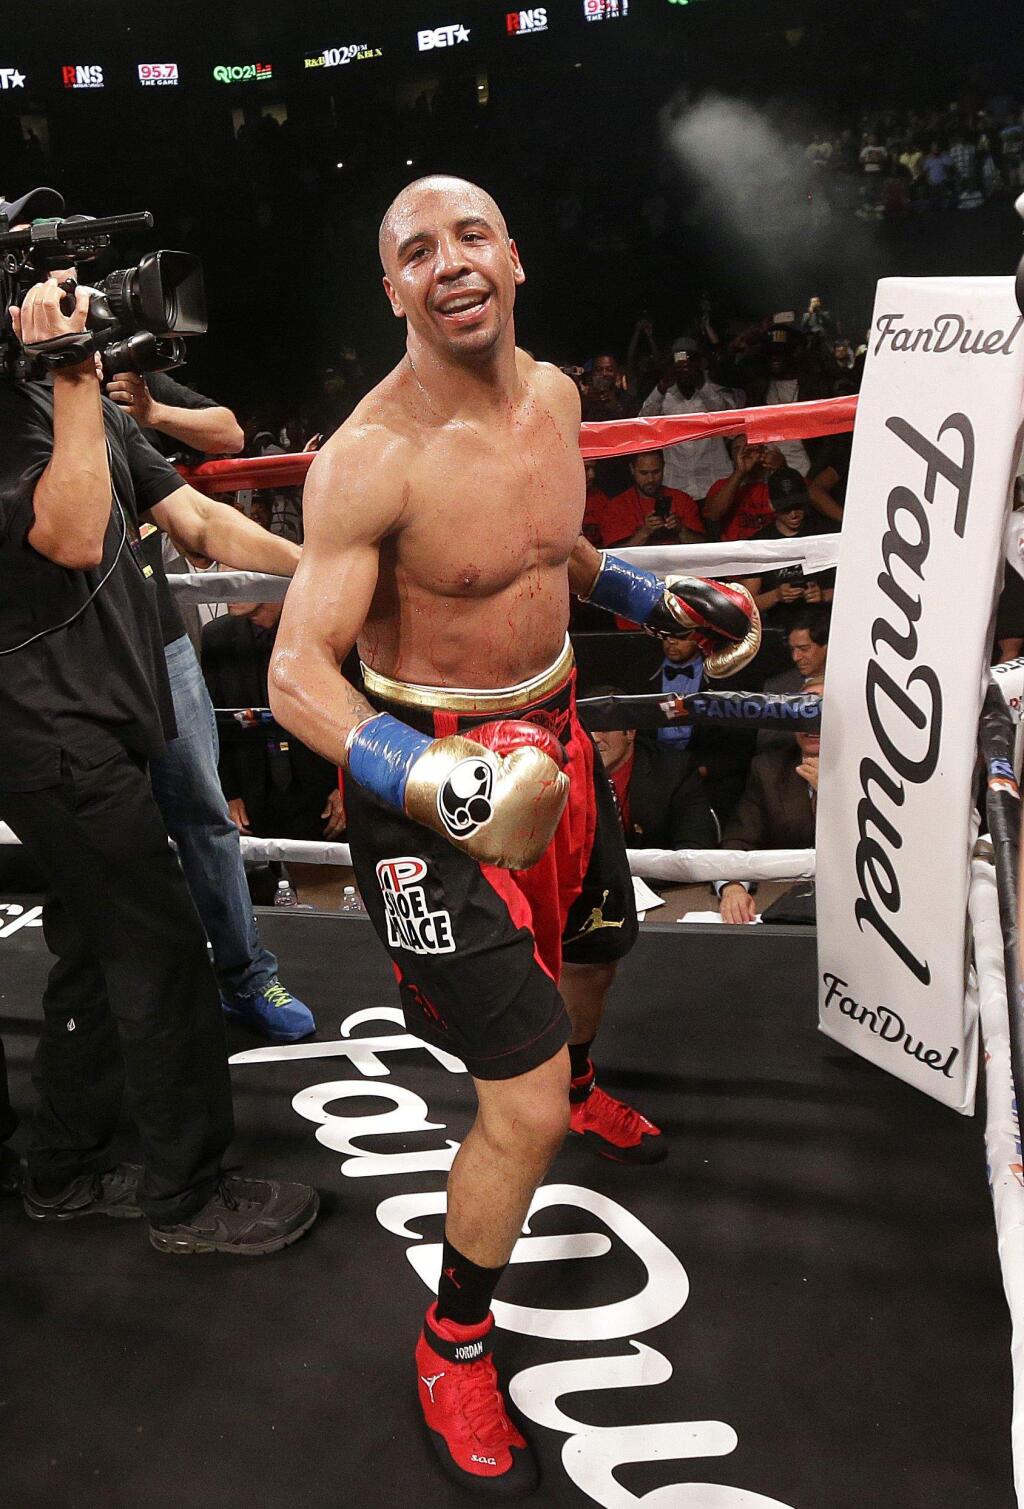 Andre Ward celebrates after beating Paul Smith in a cruiserweight boxing match in Oakland, Calif., Saturday, June 20, 2015. Ward won when Smith's corner threw in the towel in the ninth round. (AP Photo/Jeff Chiu)